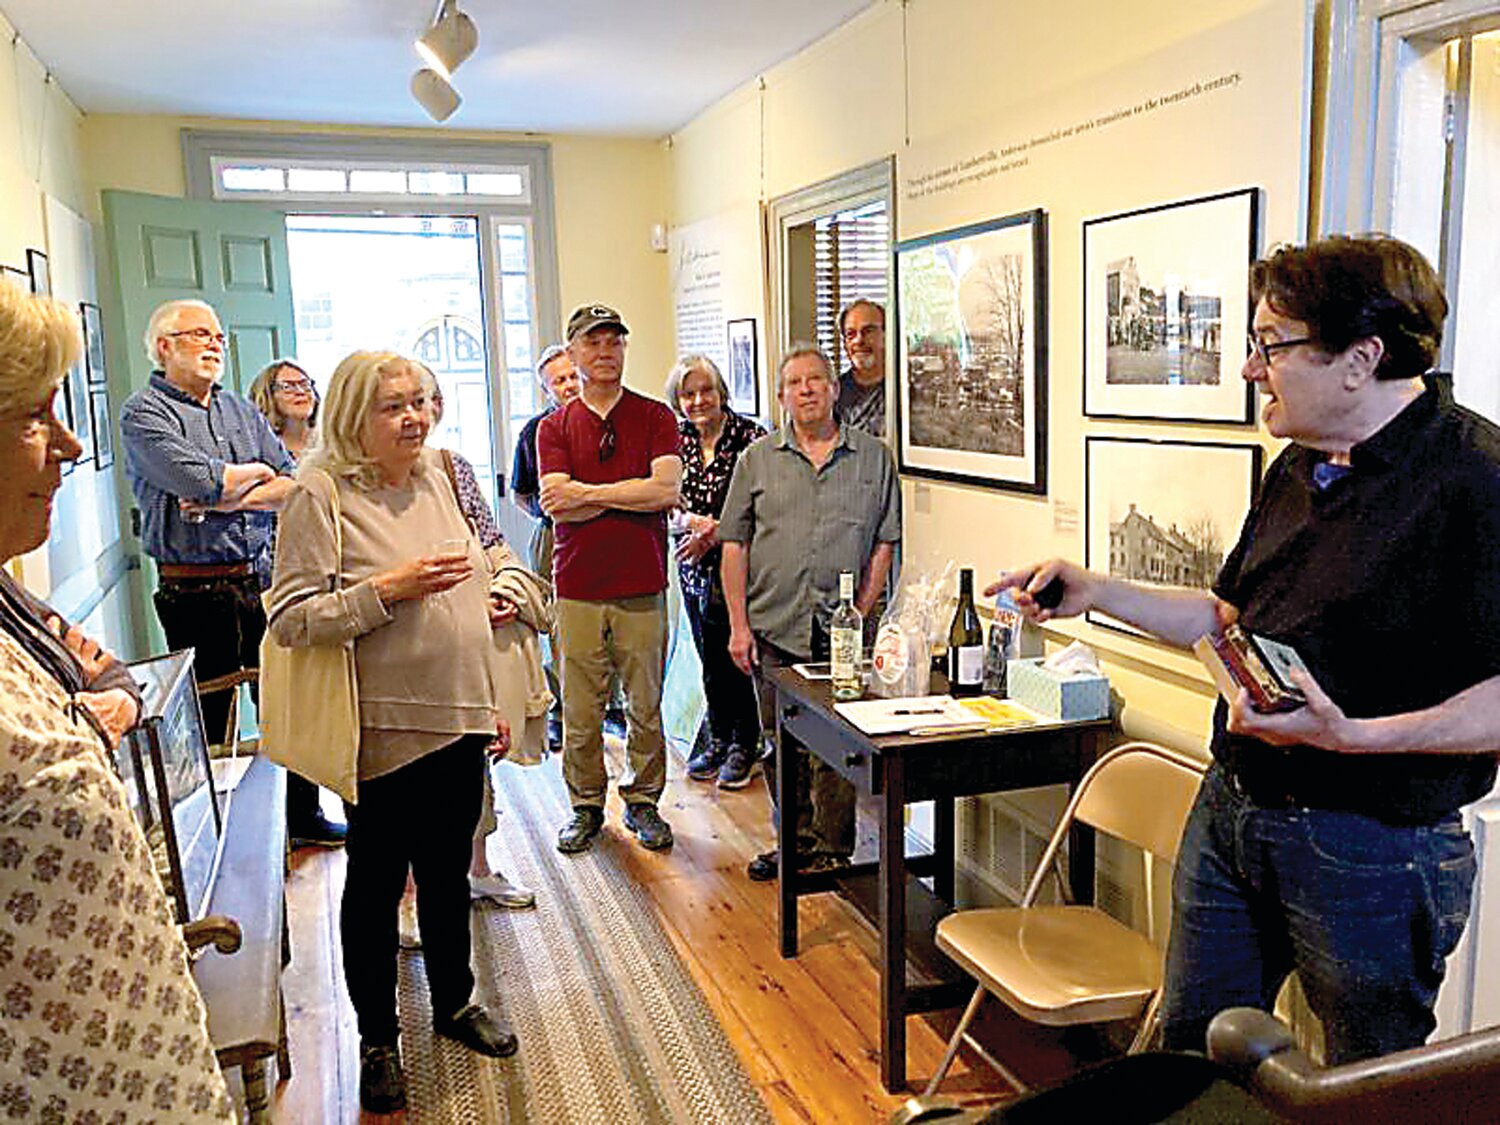 Stephen Harris (far right) and Jeffrey Apoian, (near right) speak with guests touring the Marshall House Museum exhibit on Lambertville photographer John A. Anderson, curated by Michael Menche, Apoian, Harris, and an LHS team of volunteers.